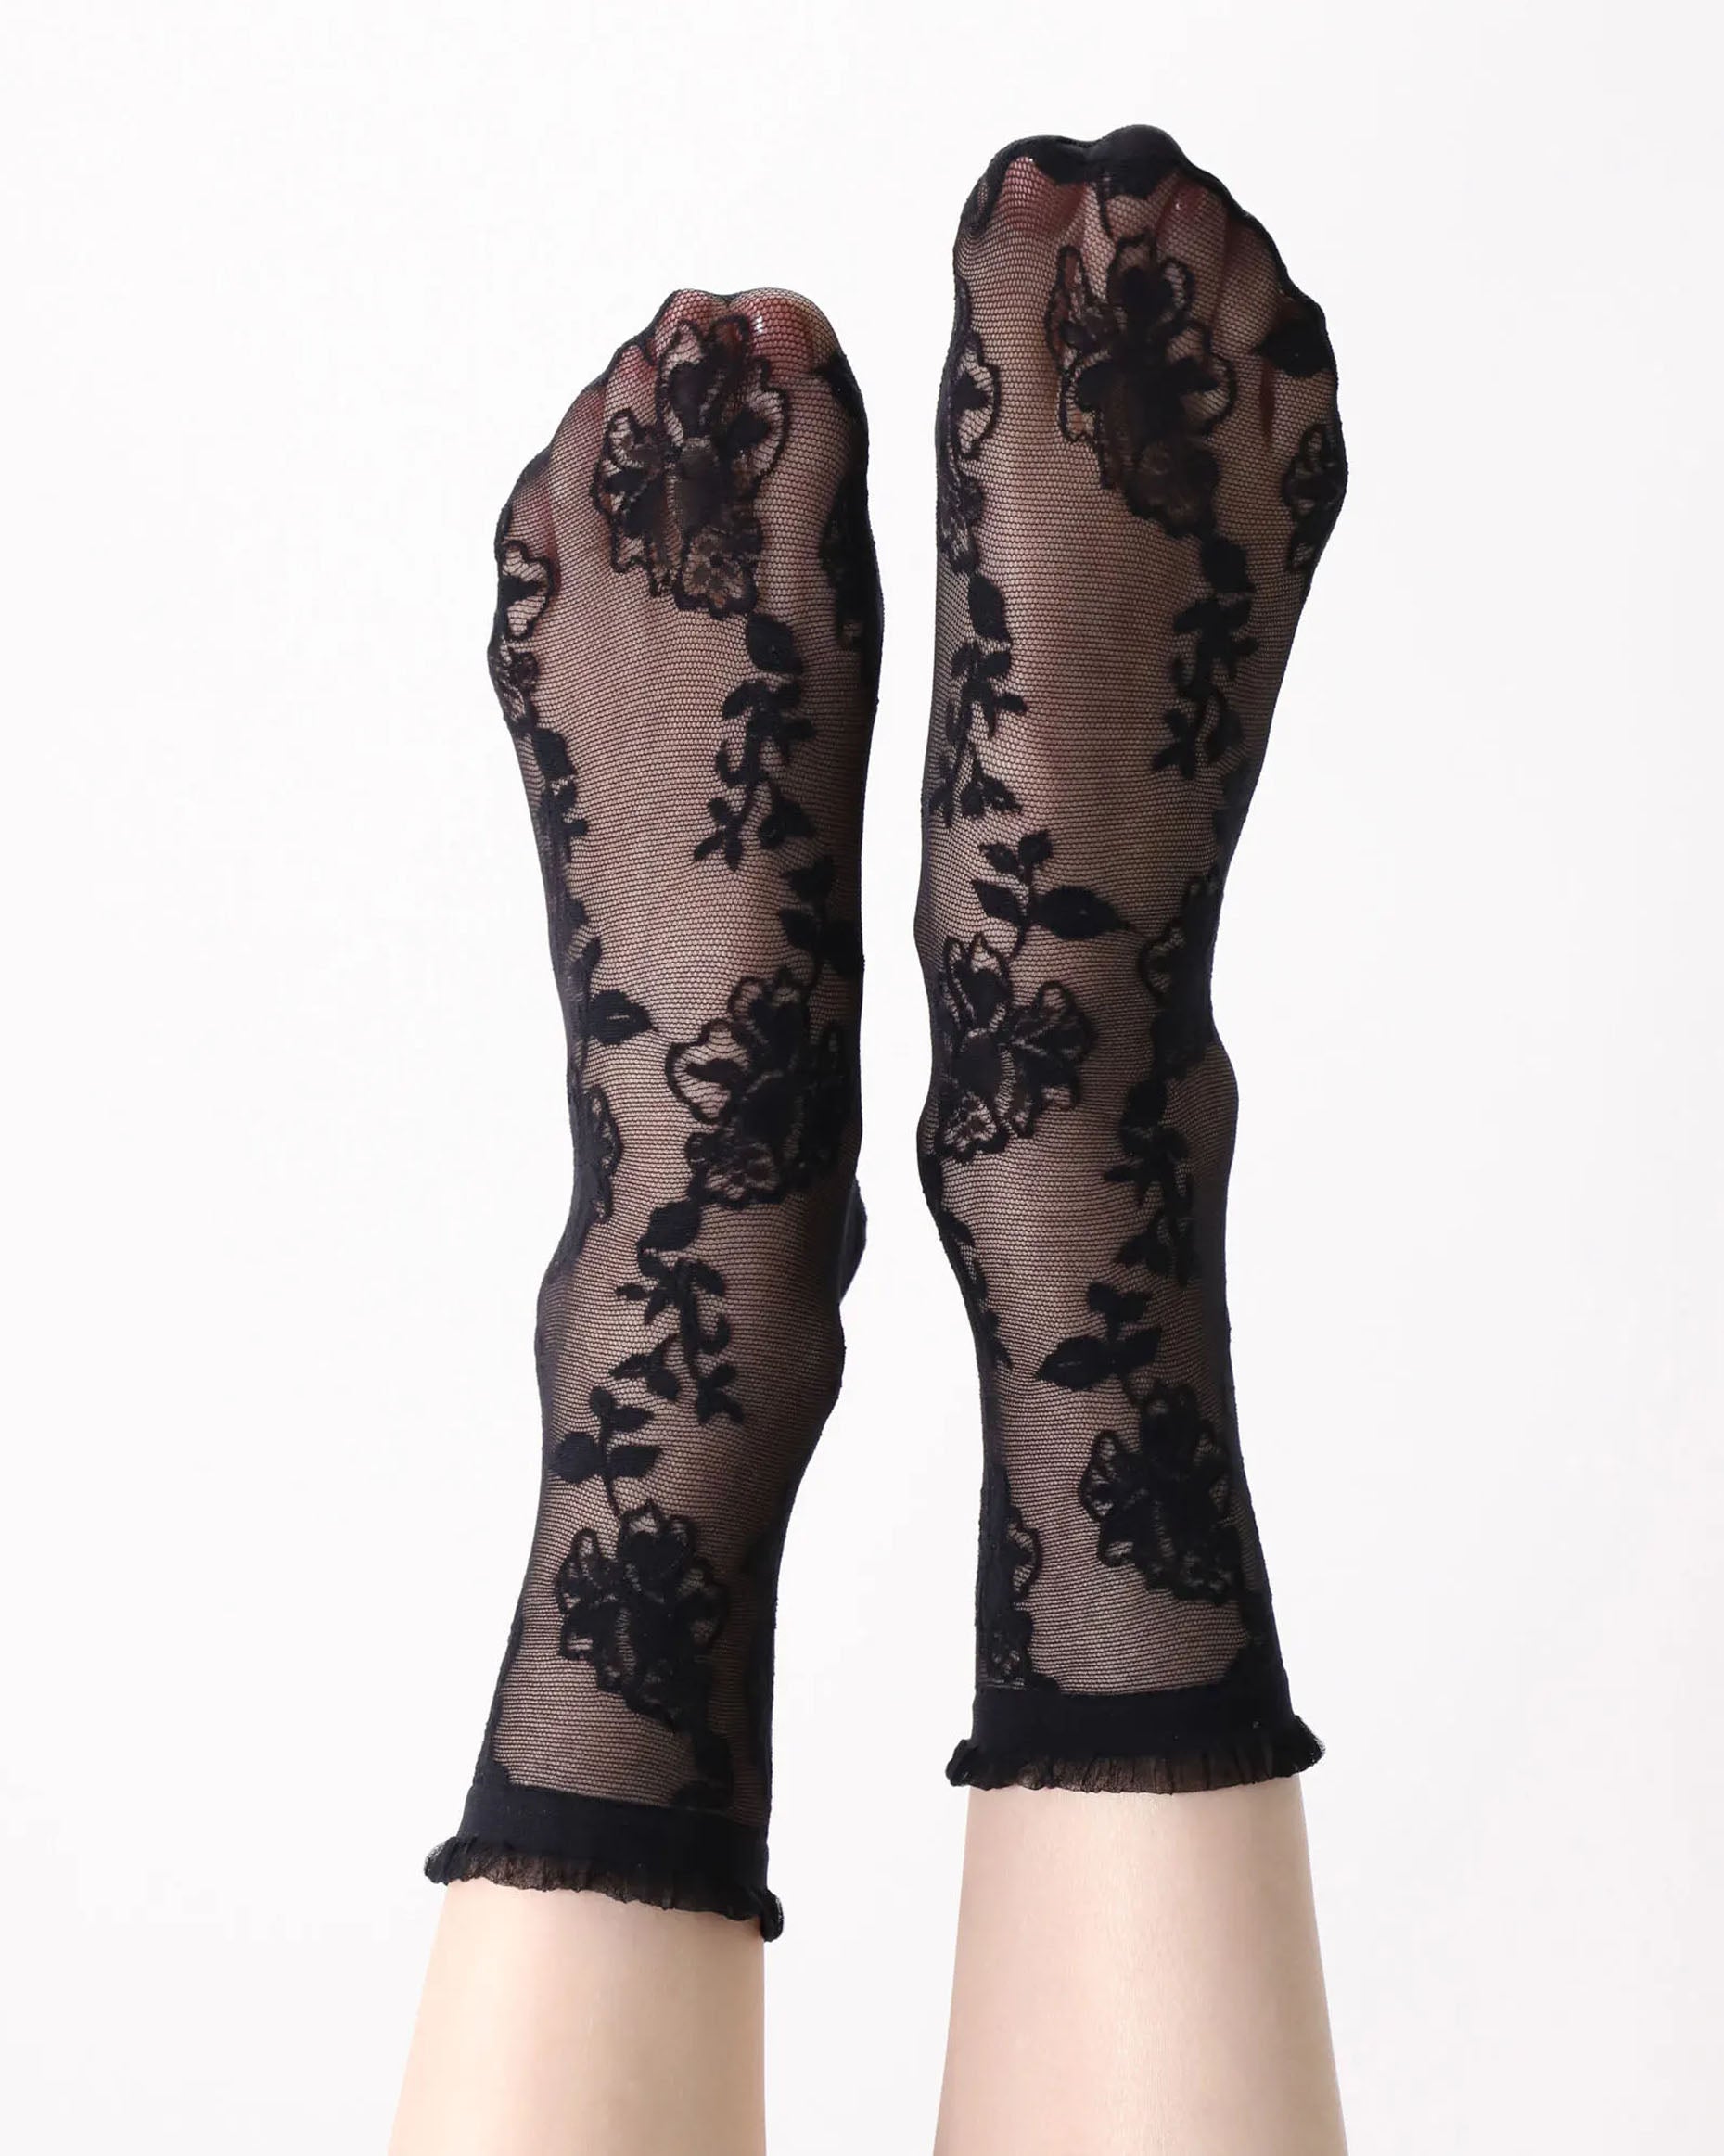 Oroblù Trim Calzino - Sheer black micro mesh fashion ankle socks with a woven floral lace style pattern and frill cuff edge.